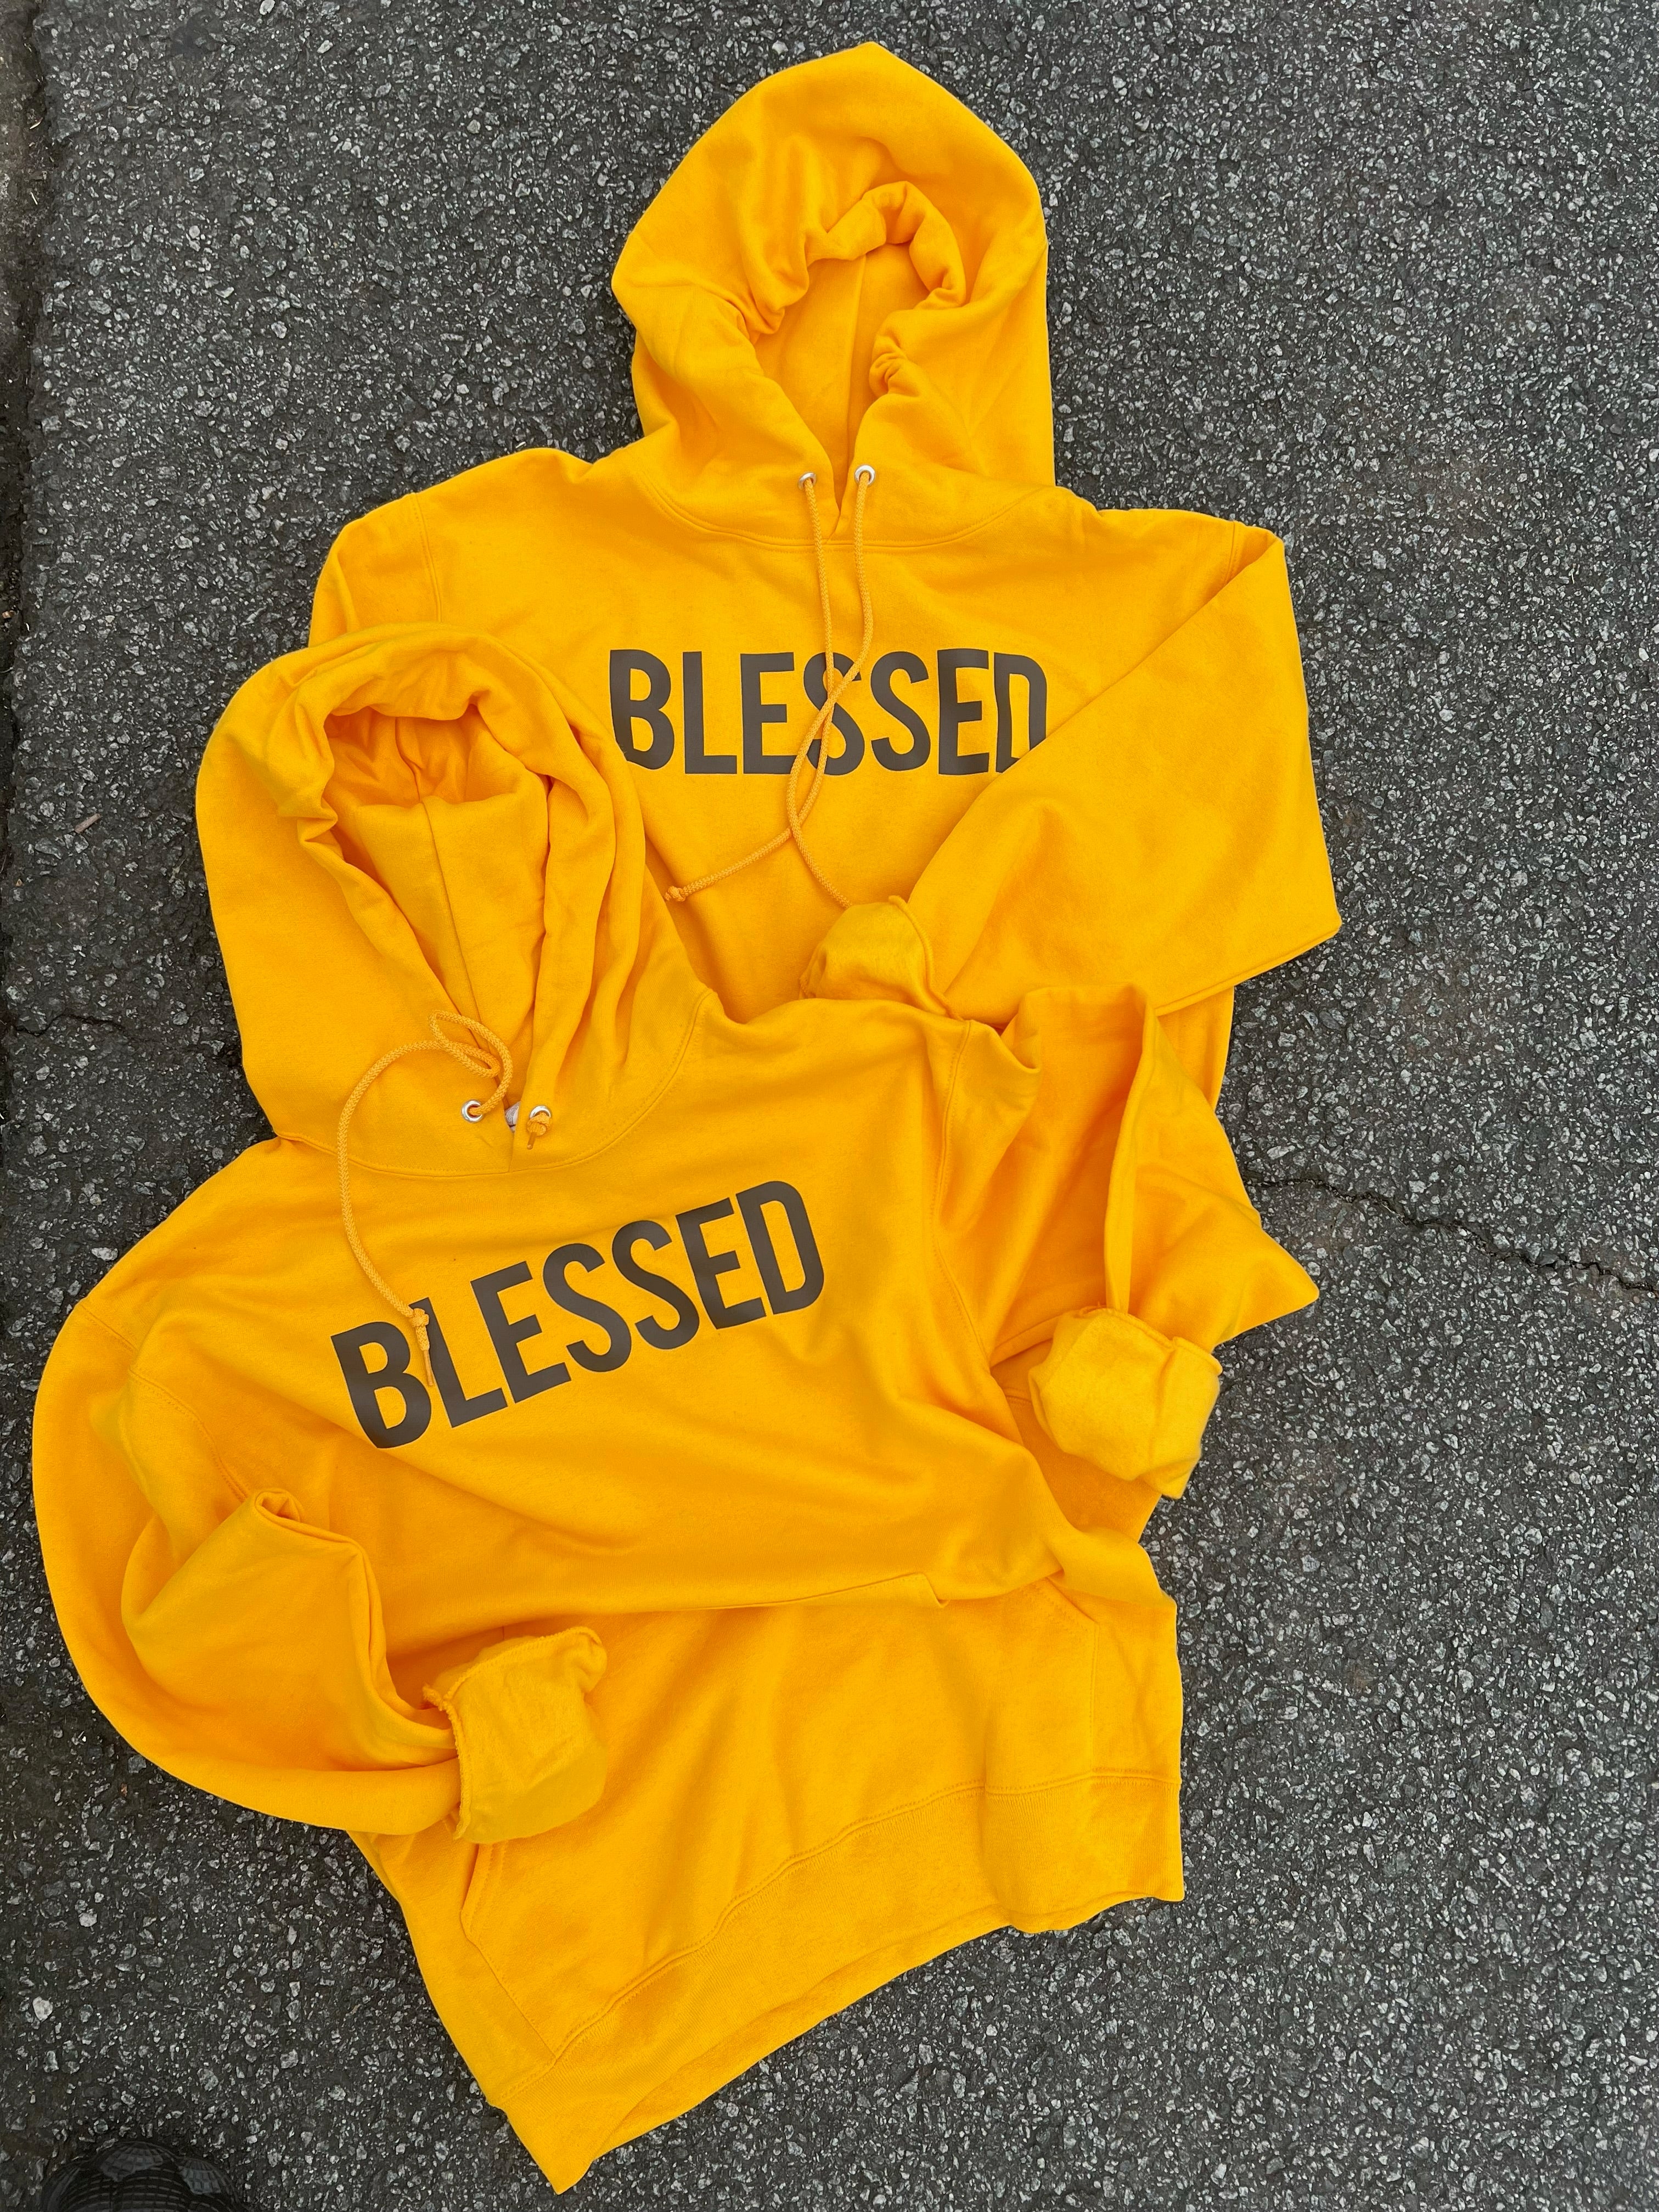 BLESSED - Item of the Month